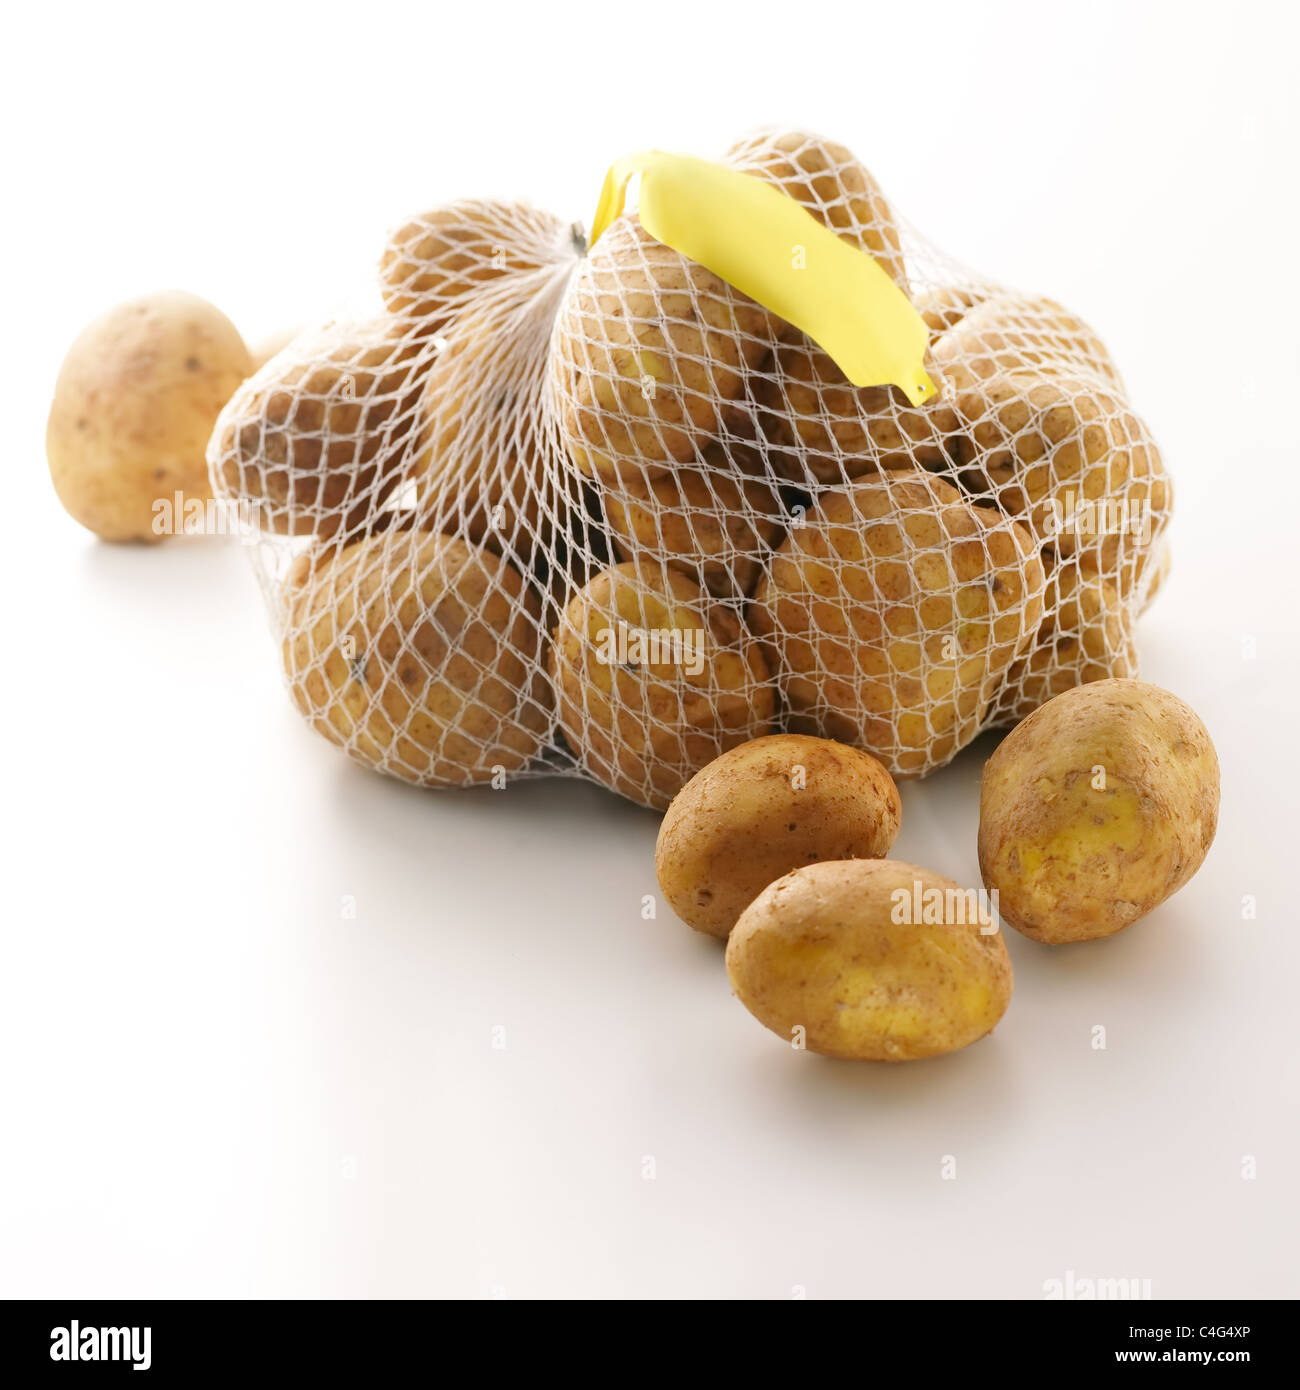 Bag of fresh potatoes with price tag on white background Stock Photo